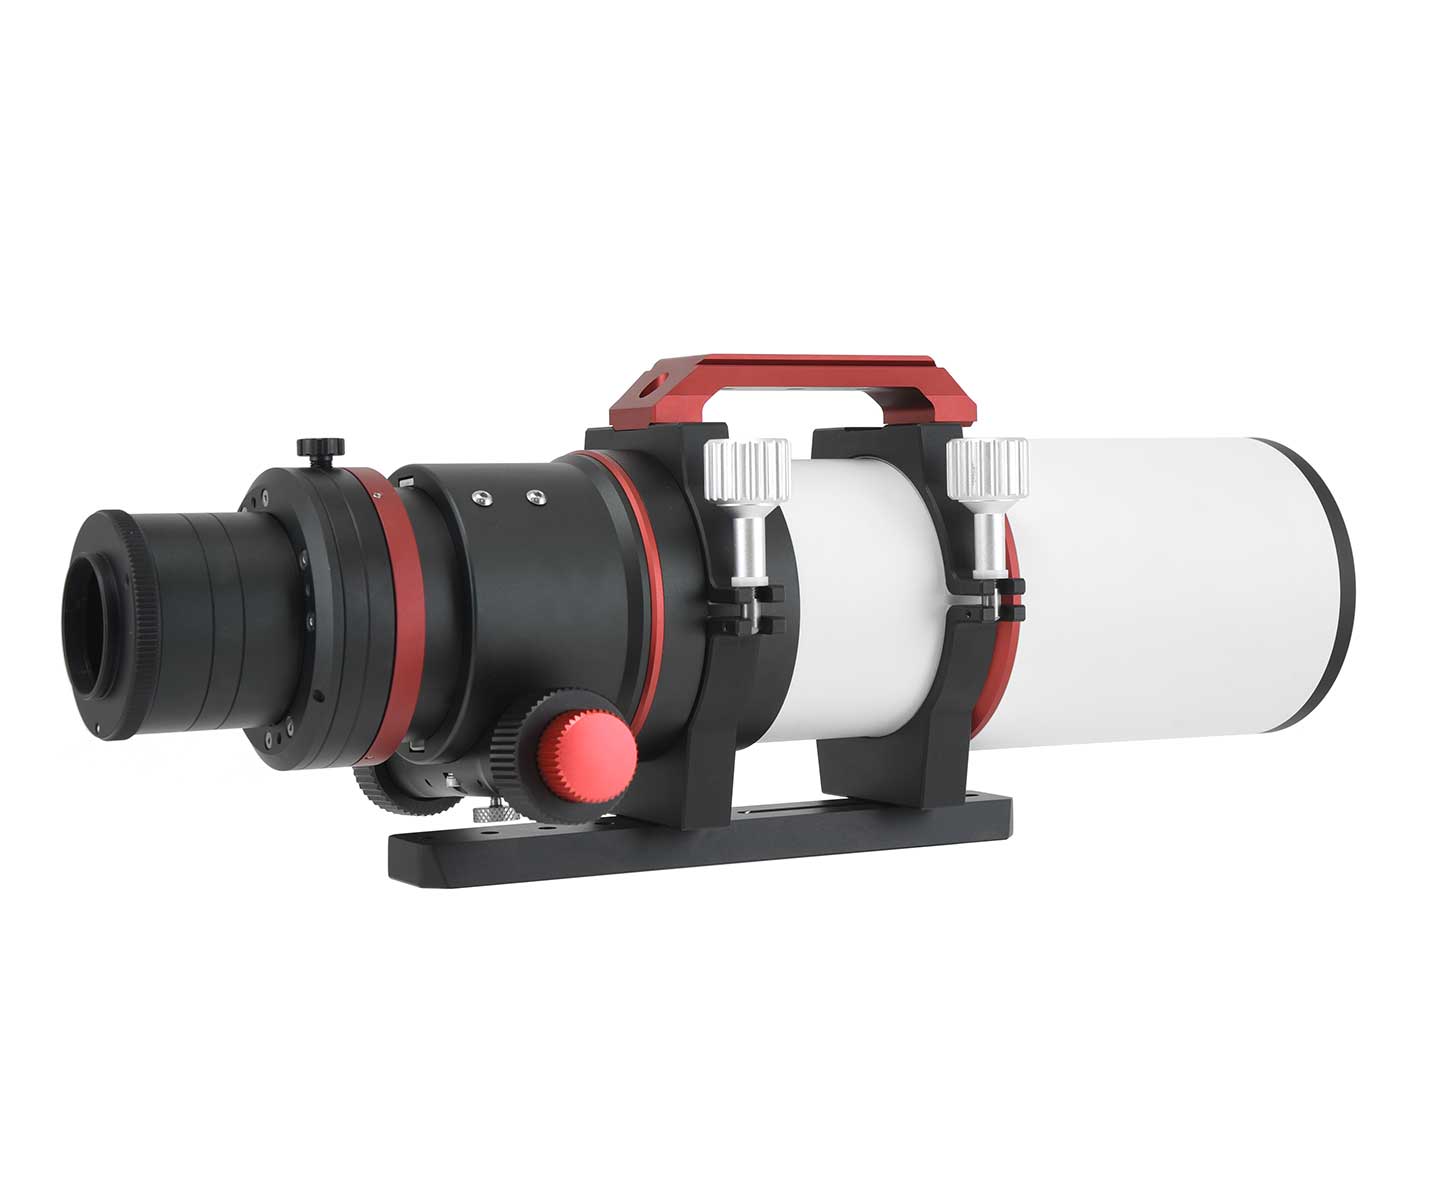  The apochromatic 5-element refractor with 90 mm aperture and powerful f/5 is ideal for astrophotography with powerful cameras. [EN] 